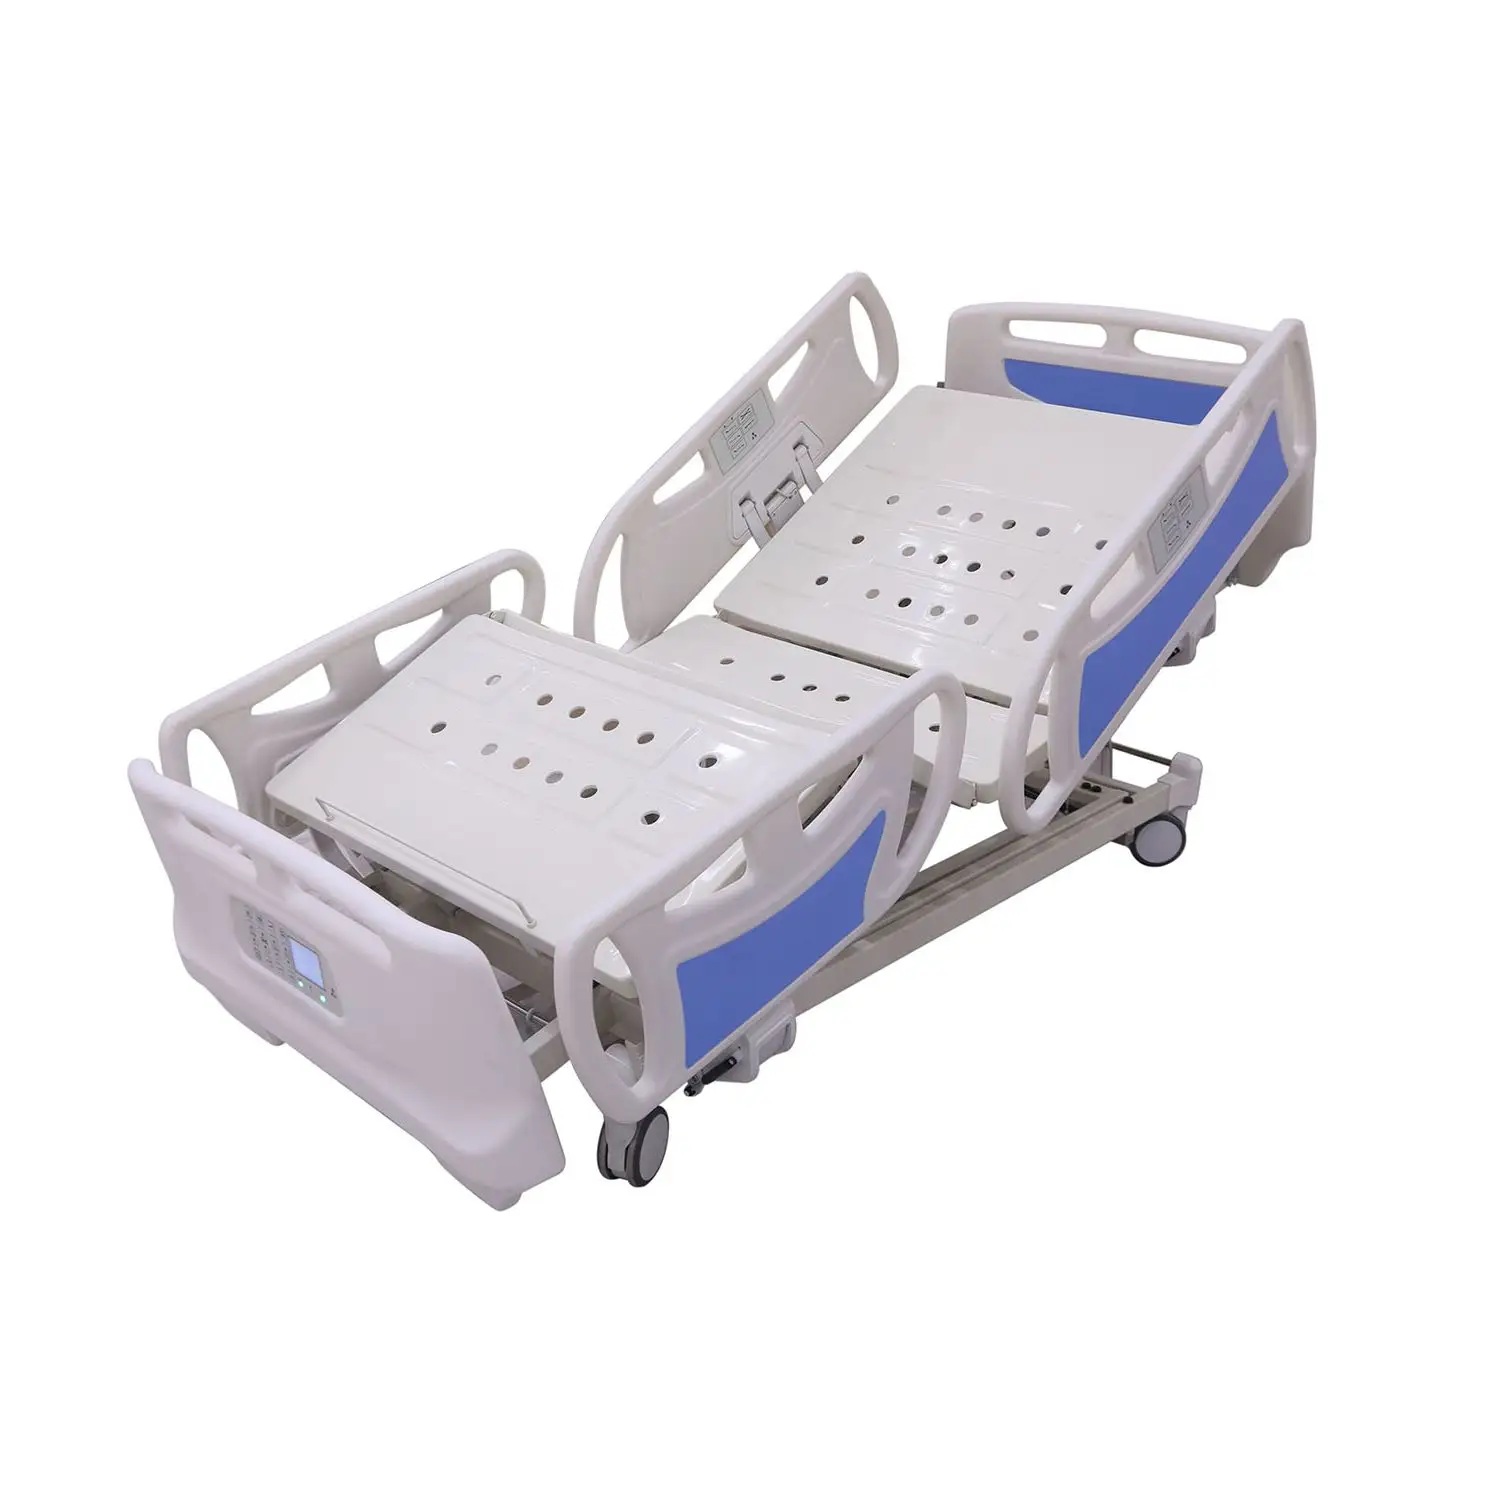 hospital bed electric Multifunctional weighing bed hospital bed electric 5 functions